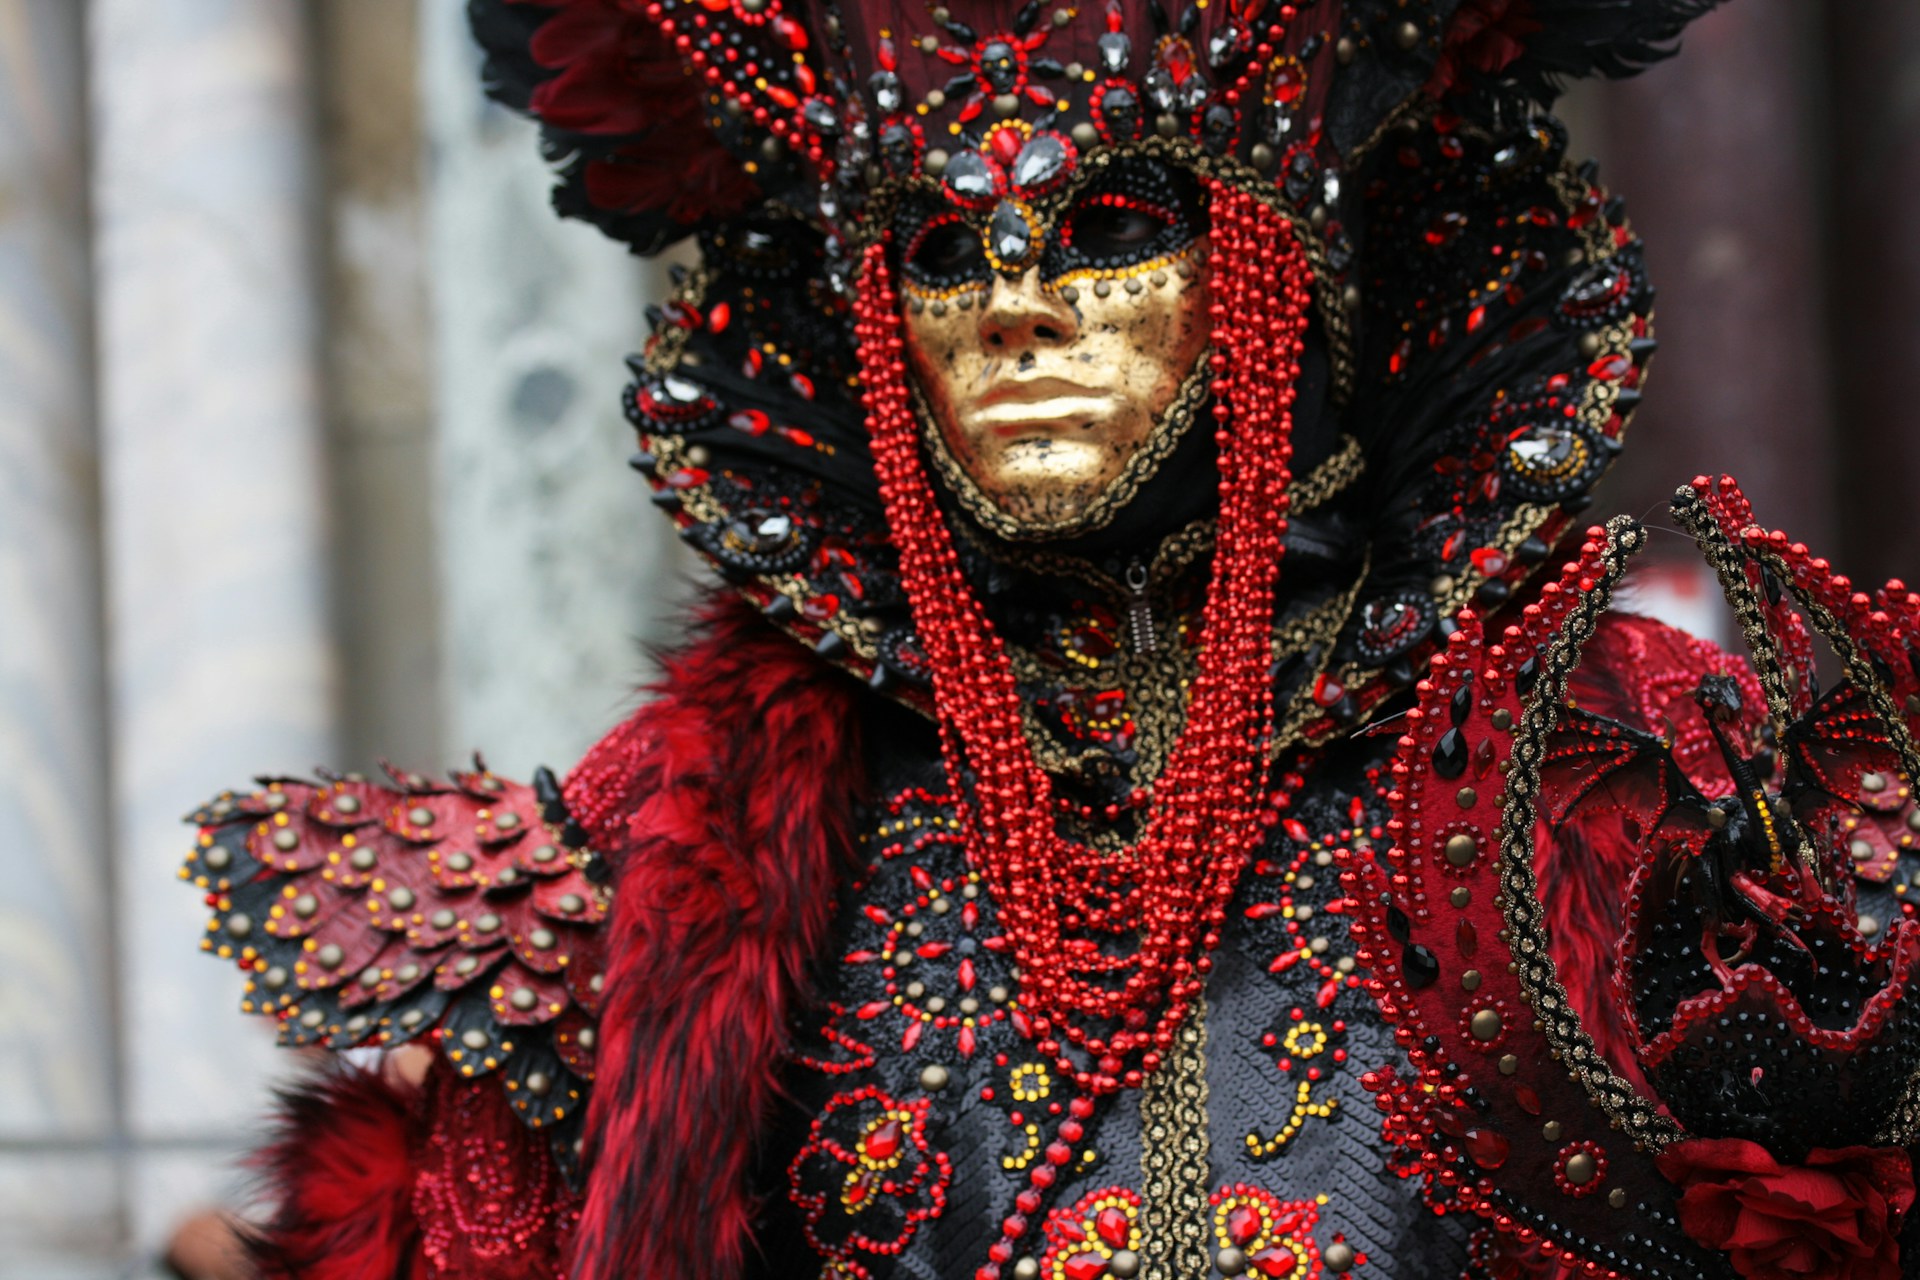 Close up of person wearing an elaborate costume and mask for Venice Carnevale